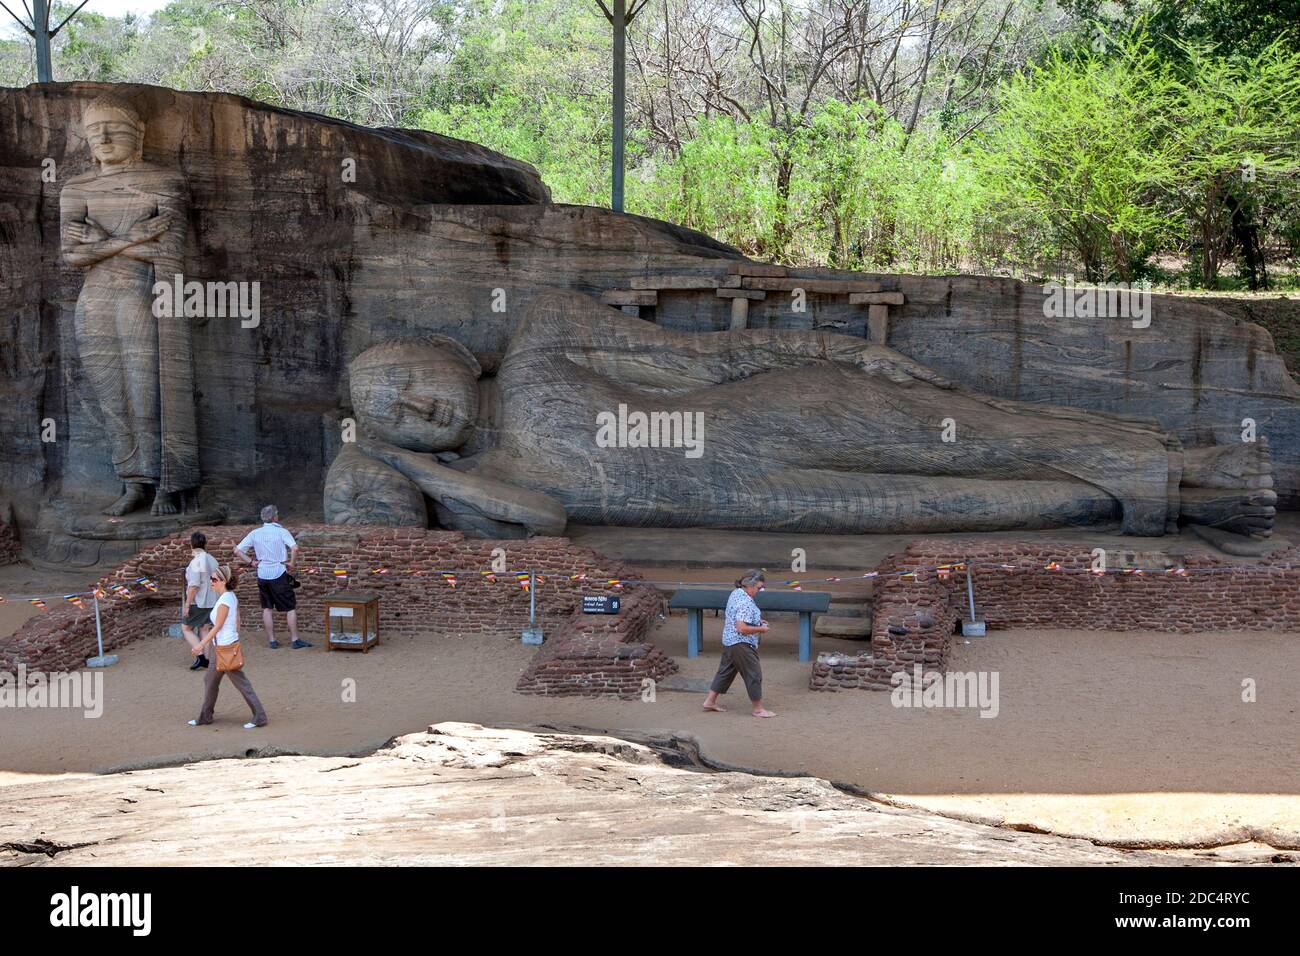 The Gal Vihara at Polonnaruwa in Sri Lanka which includes a standing and a reclining Buddha statue carved out of a single slab of granite rock. Stock Photo